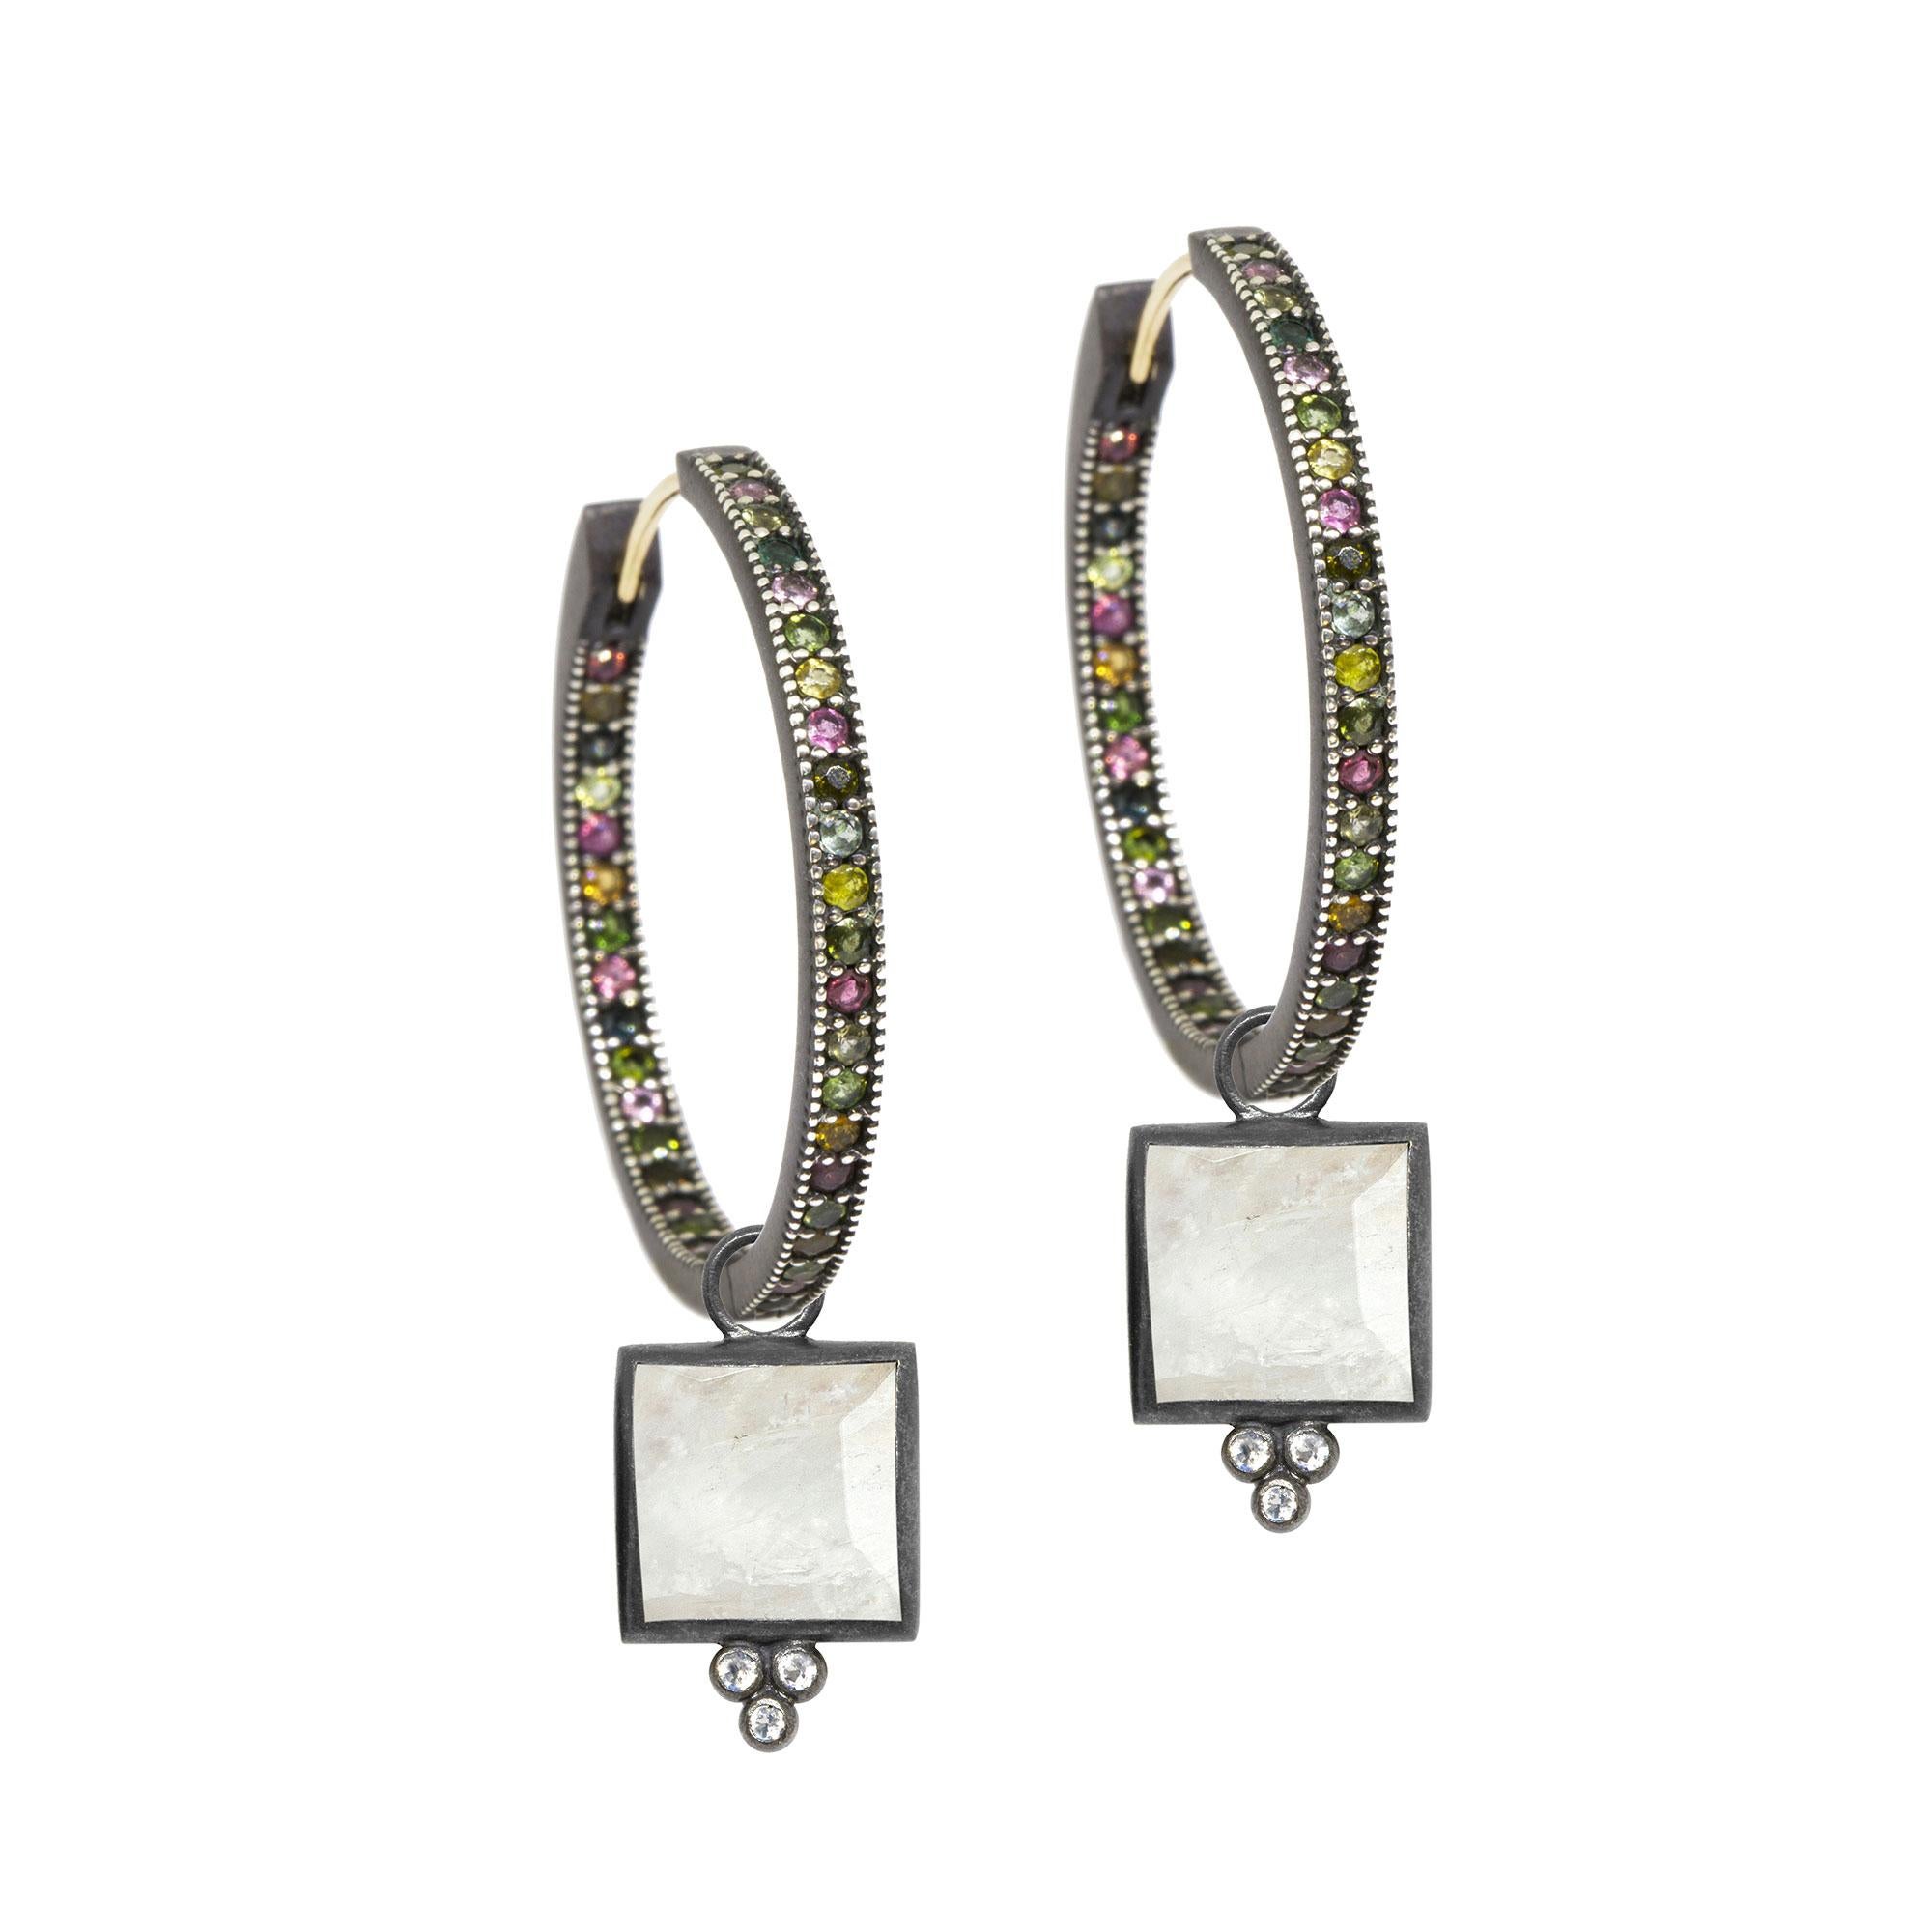 Square dance: Designed with hand-faceted moonstone framed in a textured blackened silver, our diamond-accented Ariana Oxidized Charms pair with any of our hoops and mix well with other styles.
Nina Nguyen Design's patent-pending earrings have an